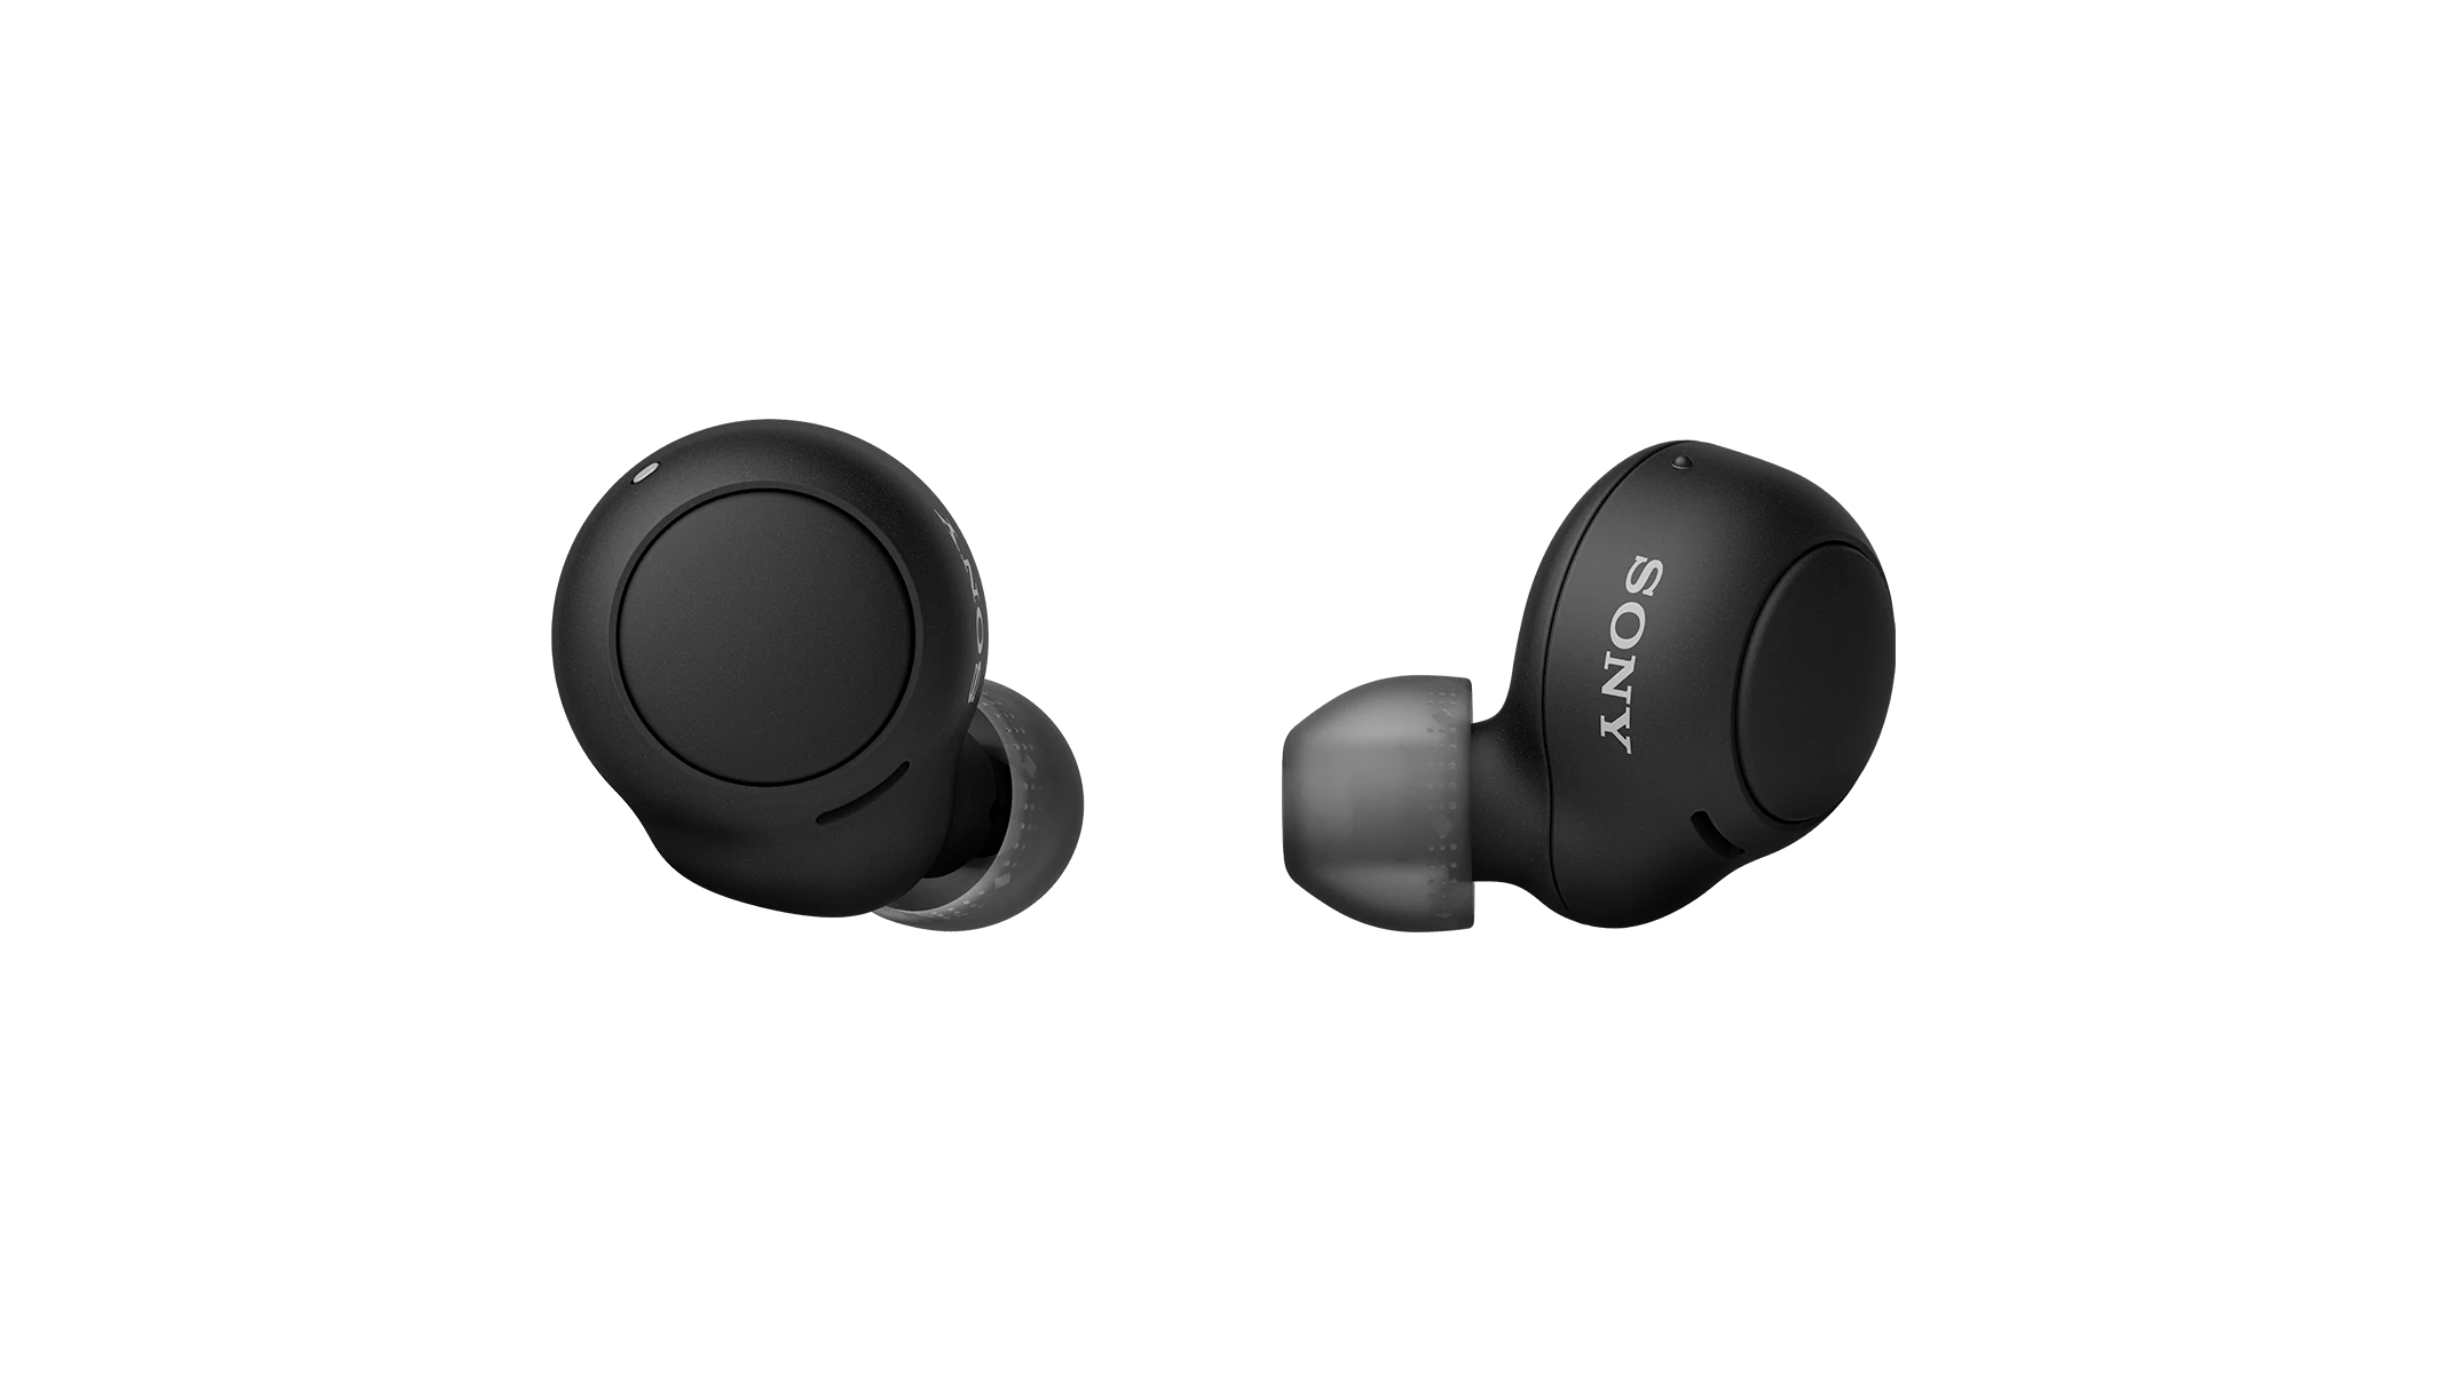 The Sony WF-C500 earbuds in black against a white background.